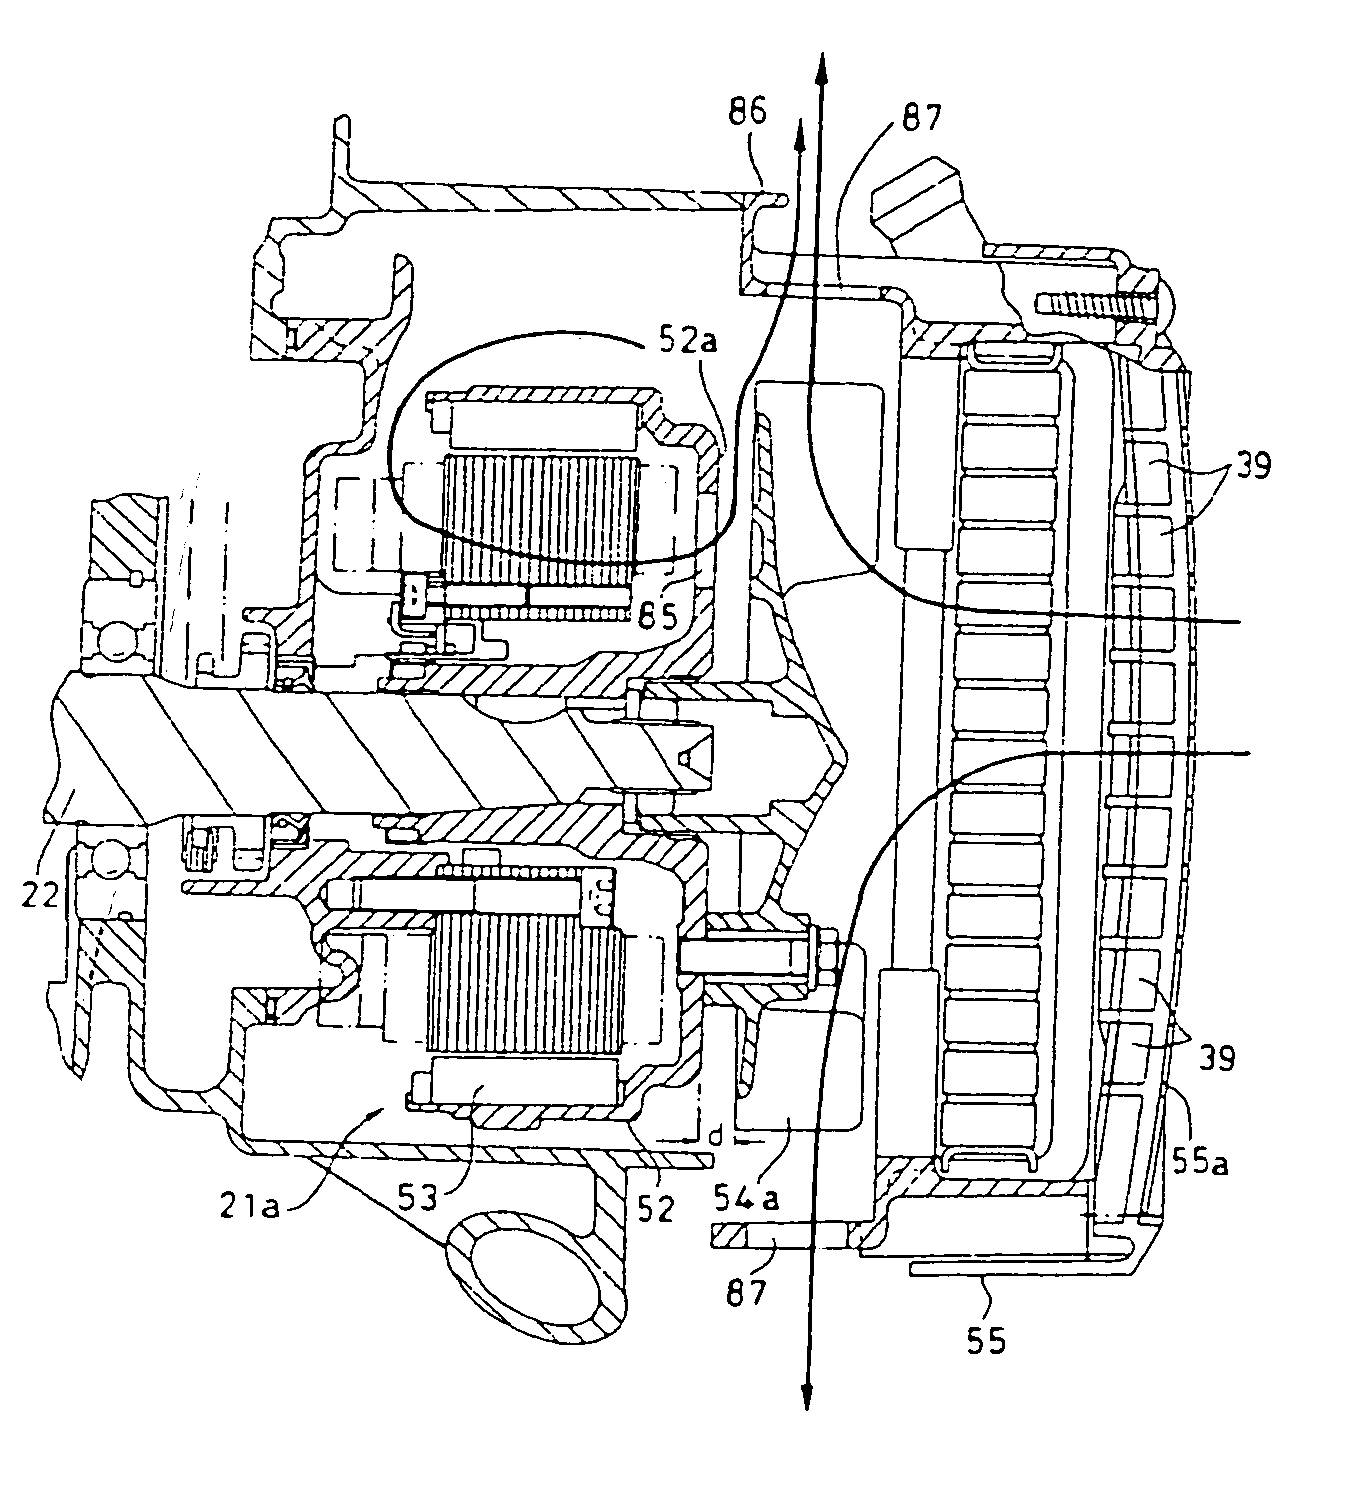 Motor cooling structure for electric vehicle